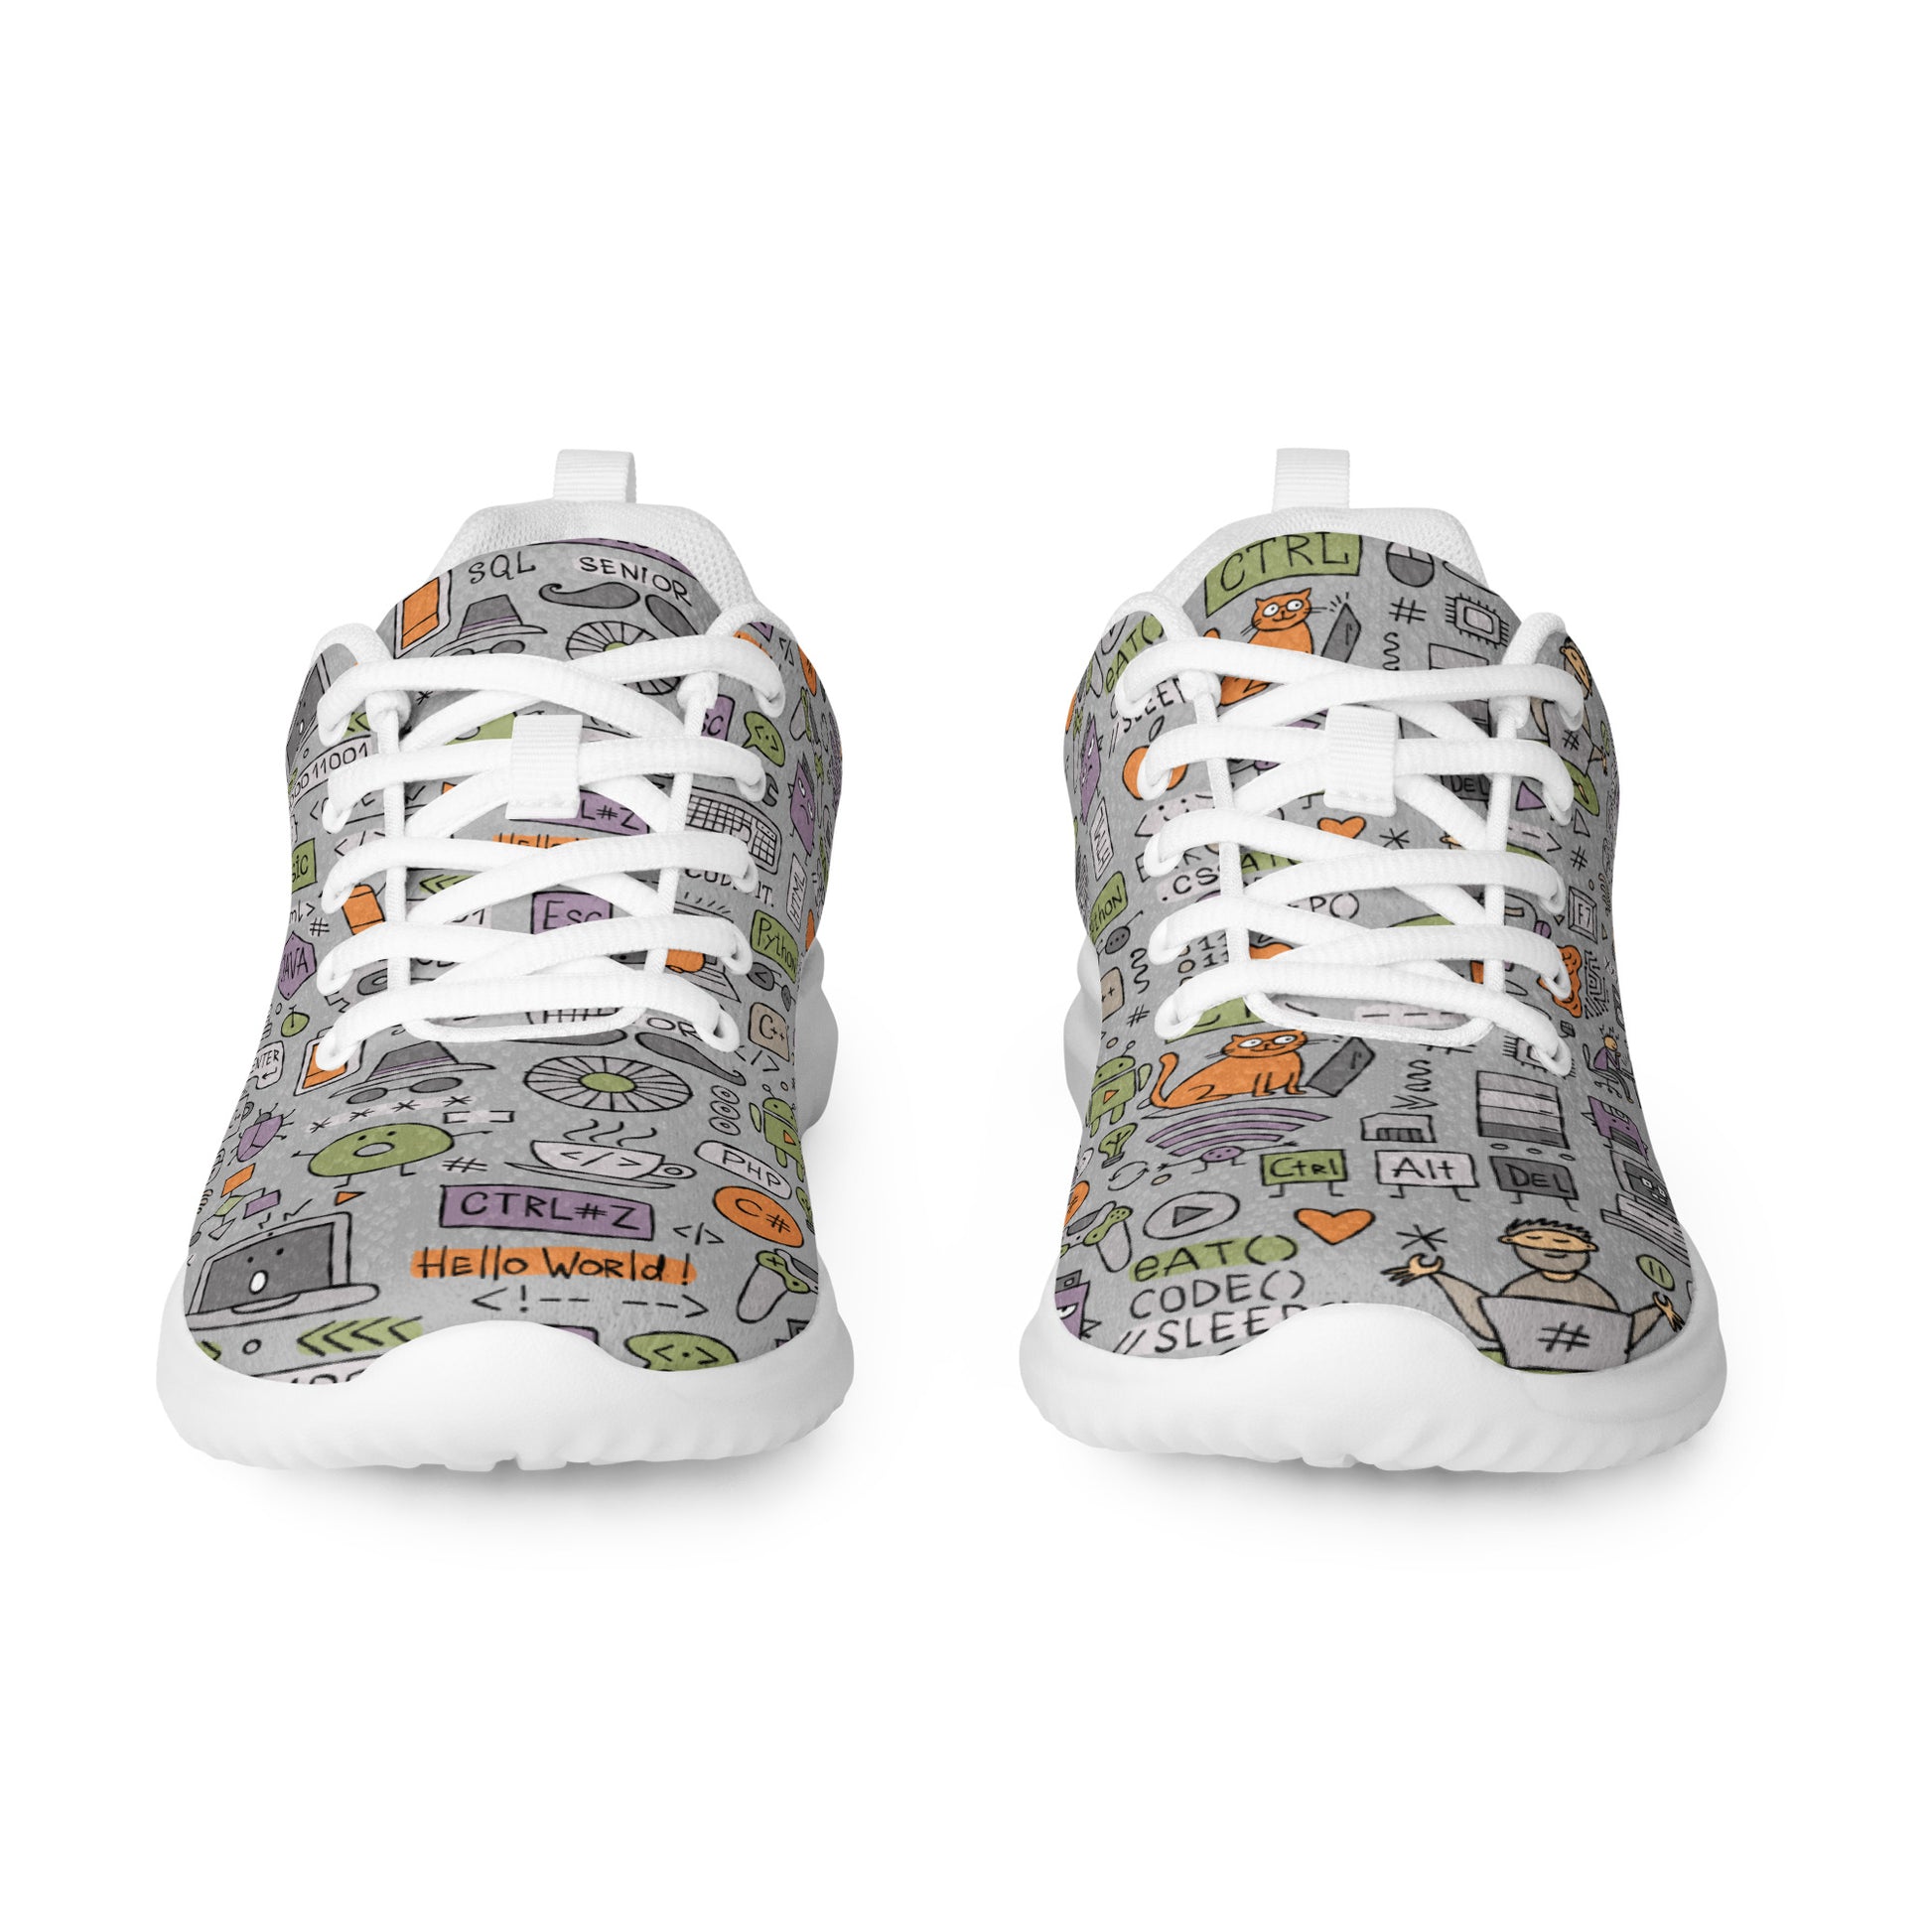 Men's Athletic Shoes with Funny IT Print kudrylab